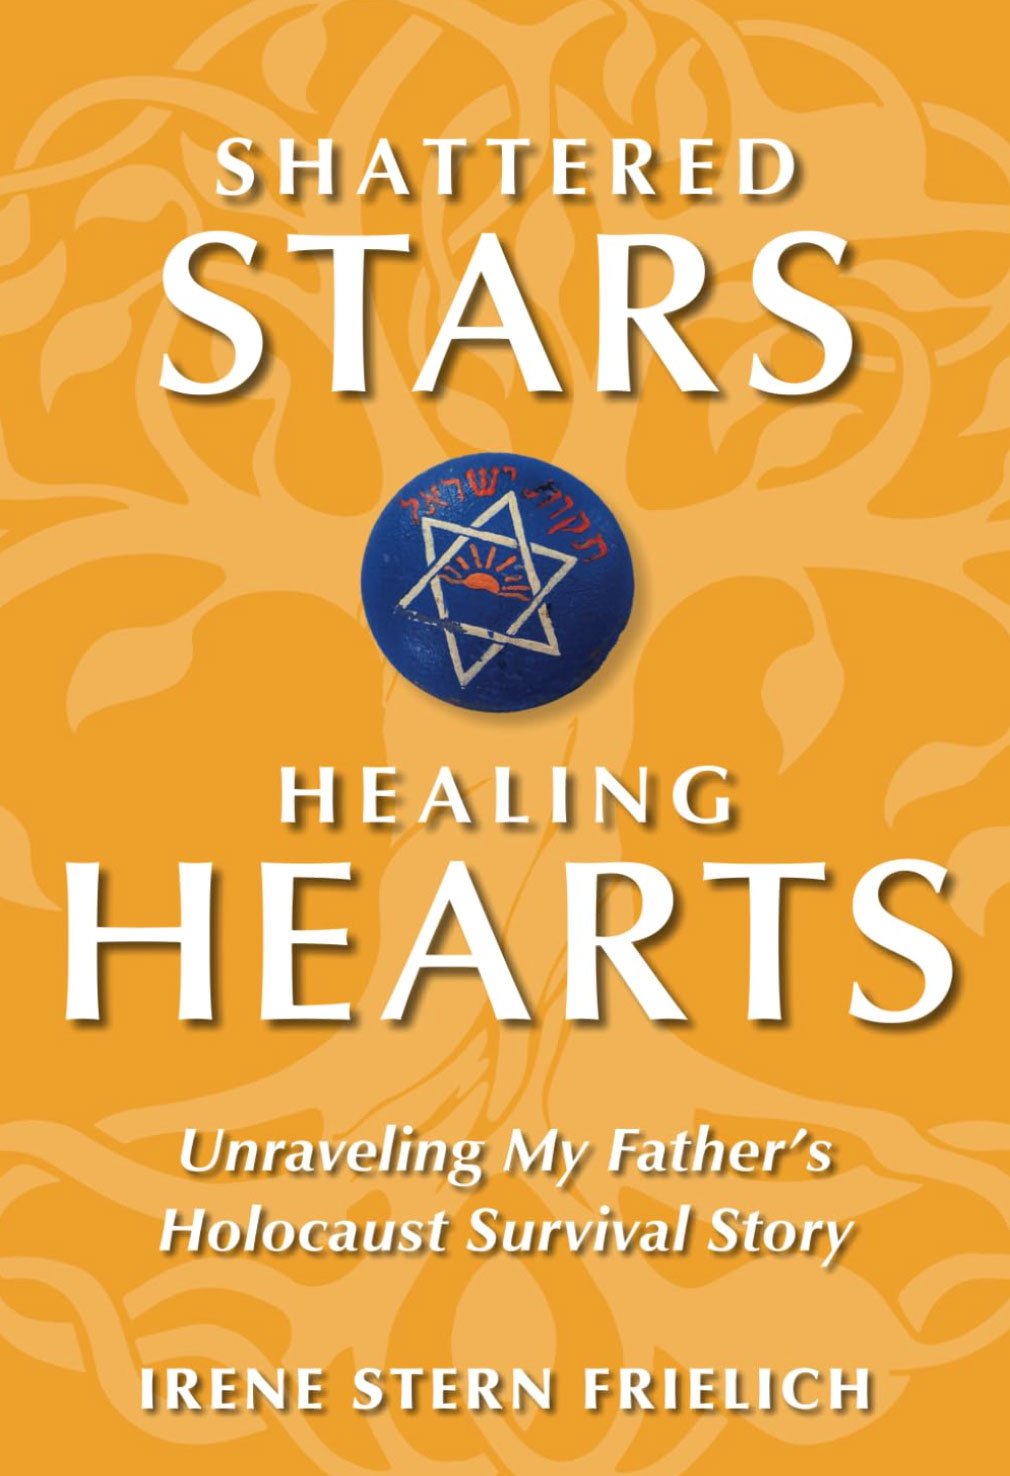 Shattered Stars, Healing Hearts: Unraveling My Father’s Holocaust Survival Story book cover